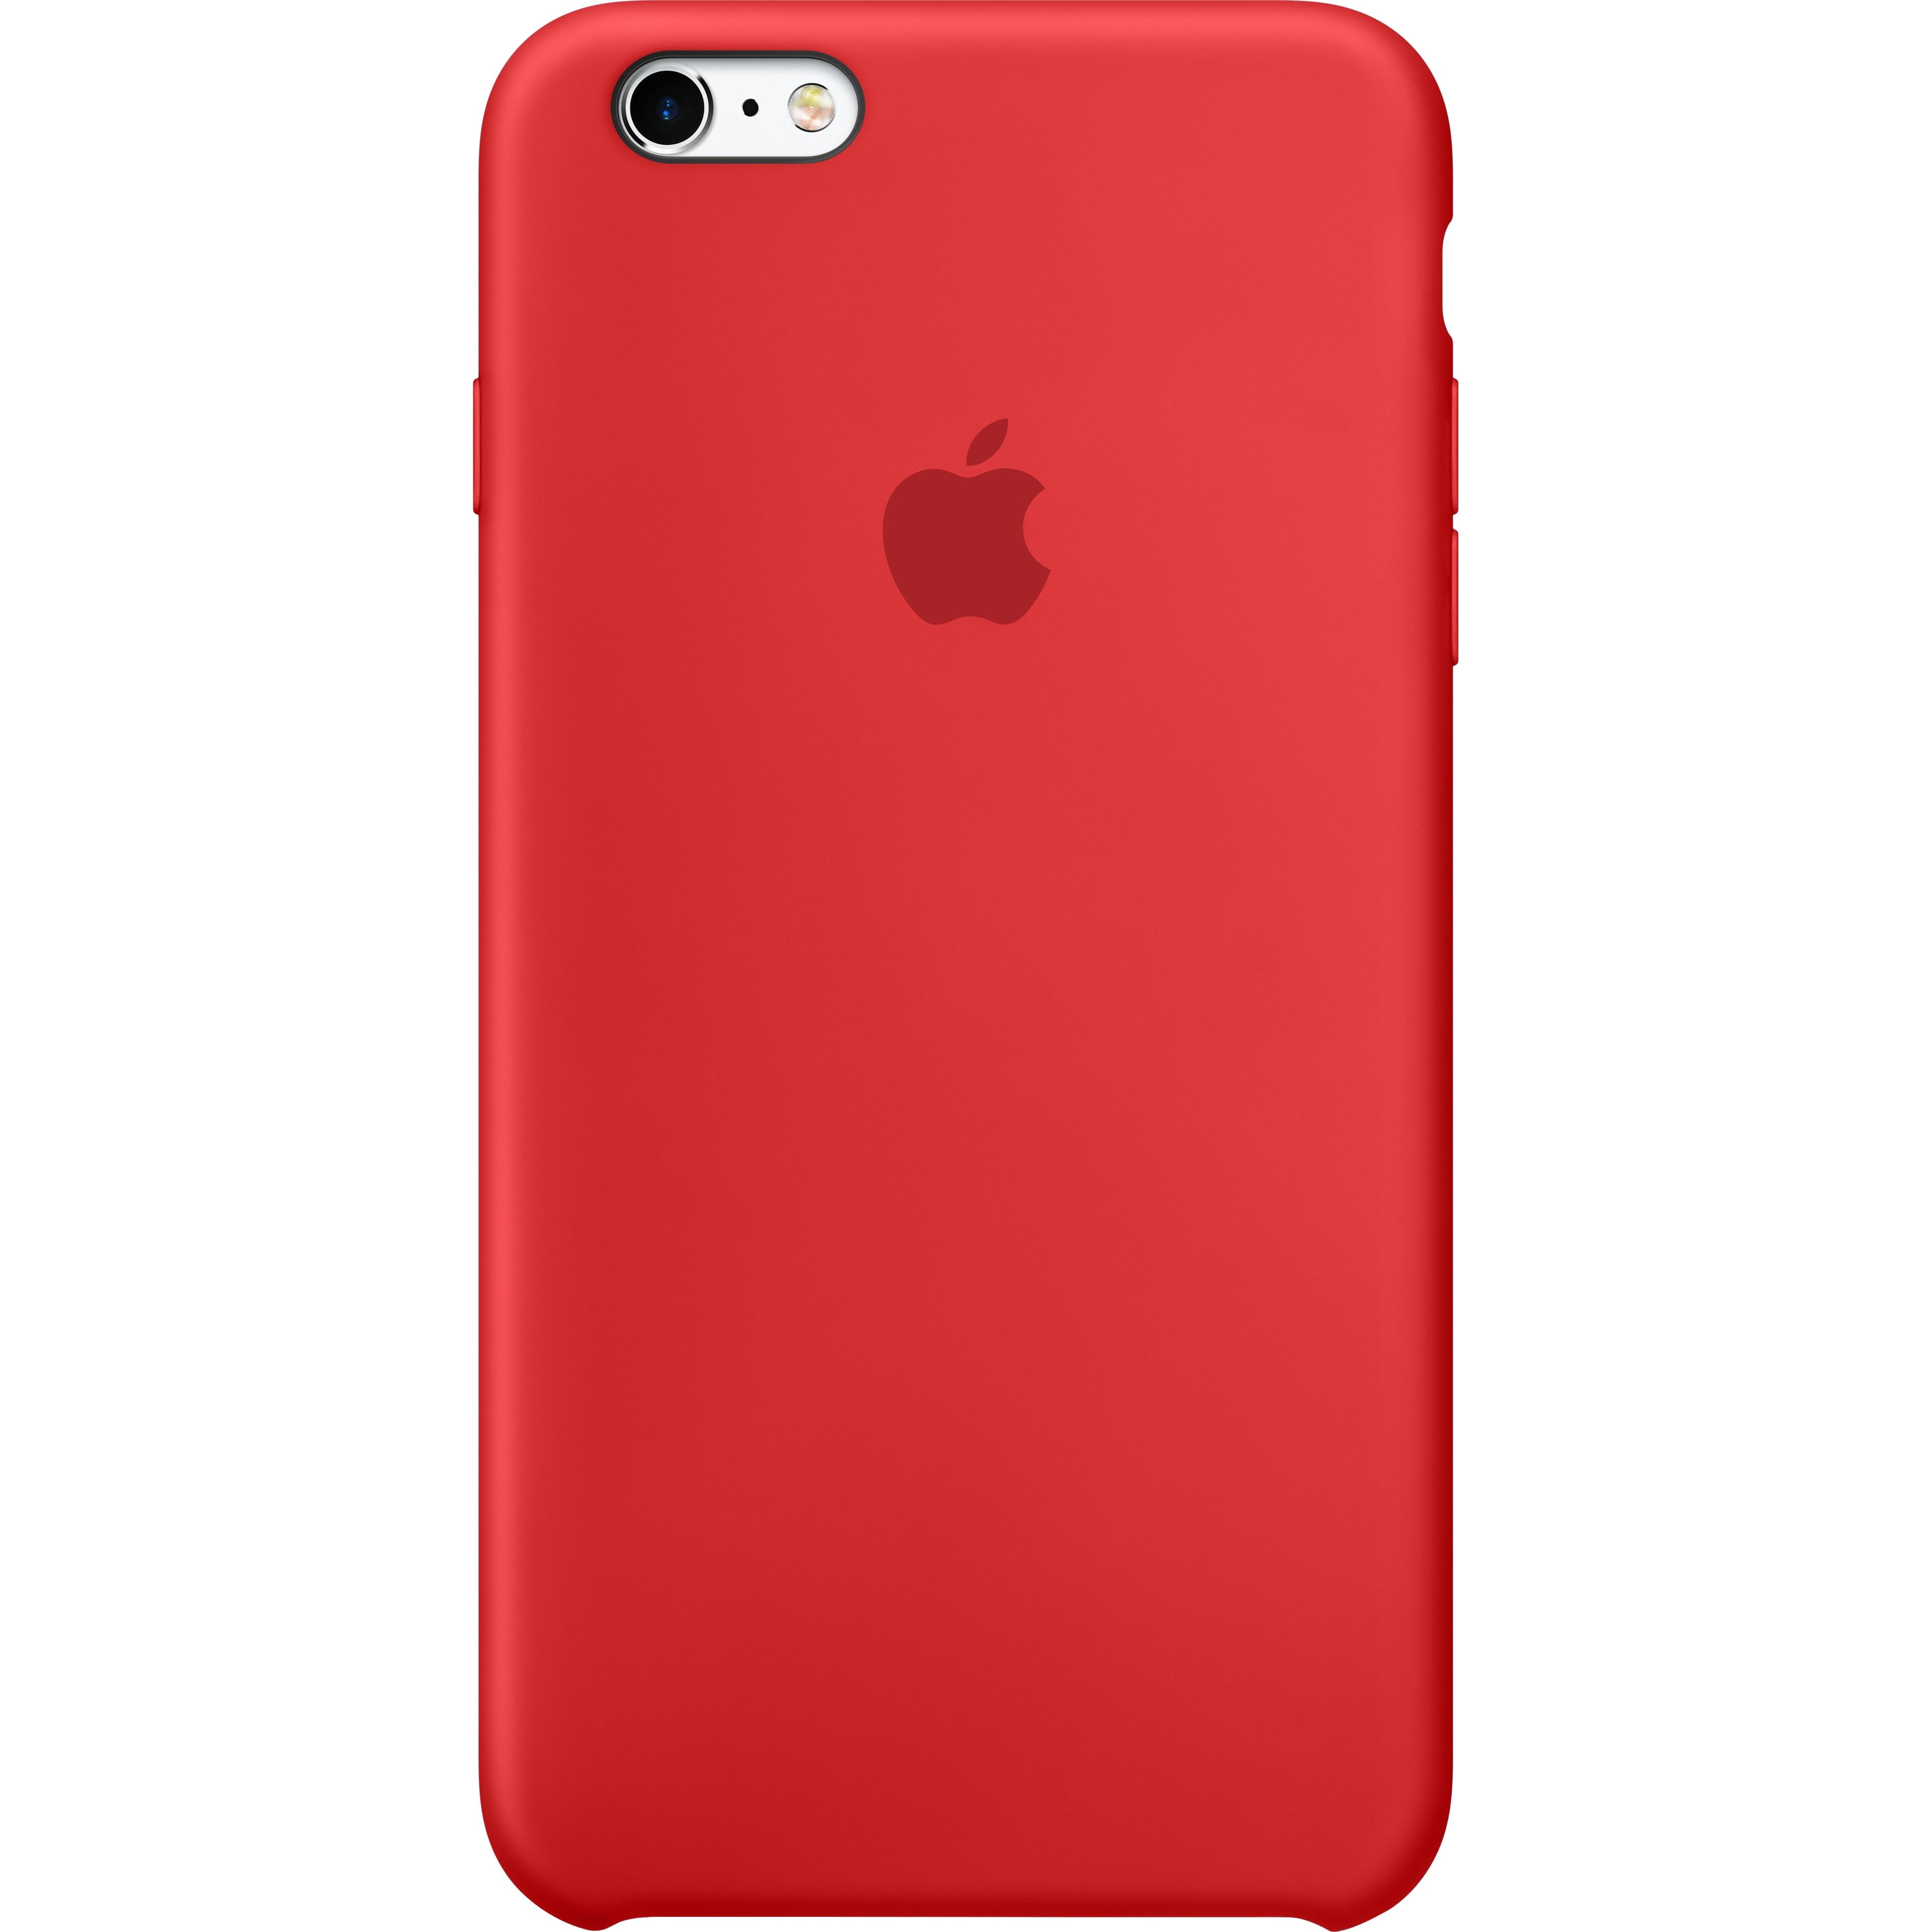 6s Case, (Product)Red - Walmart.com